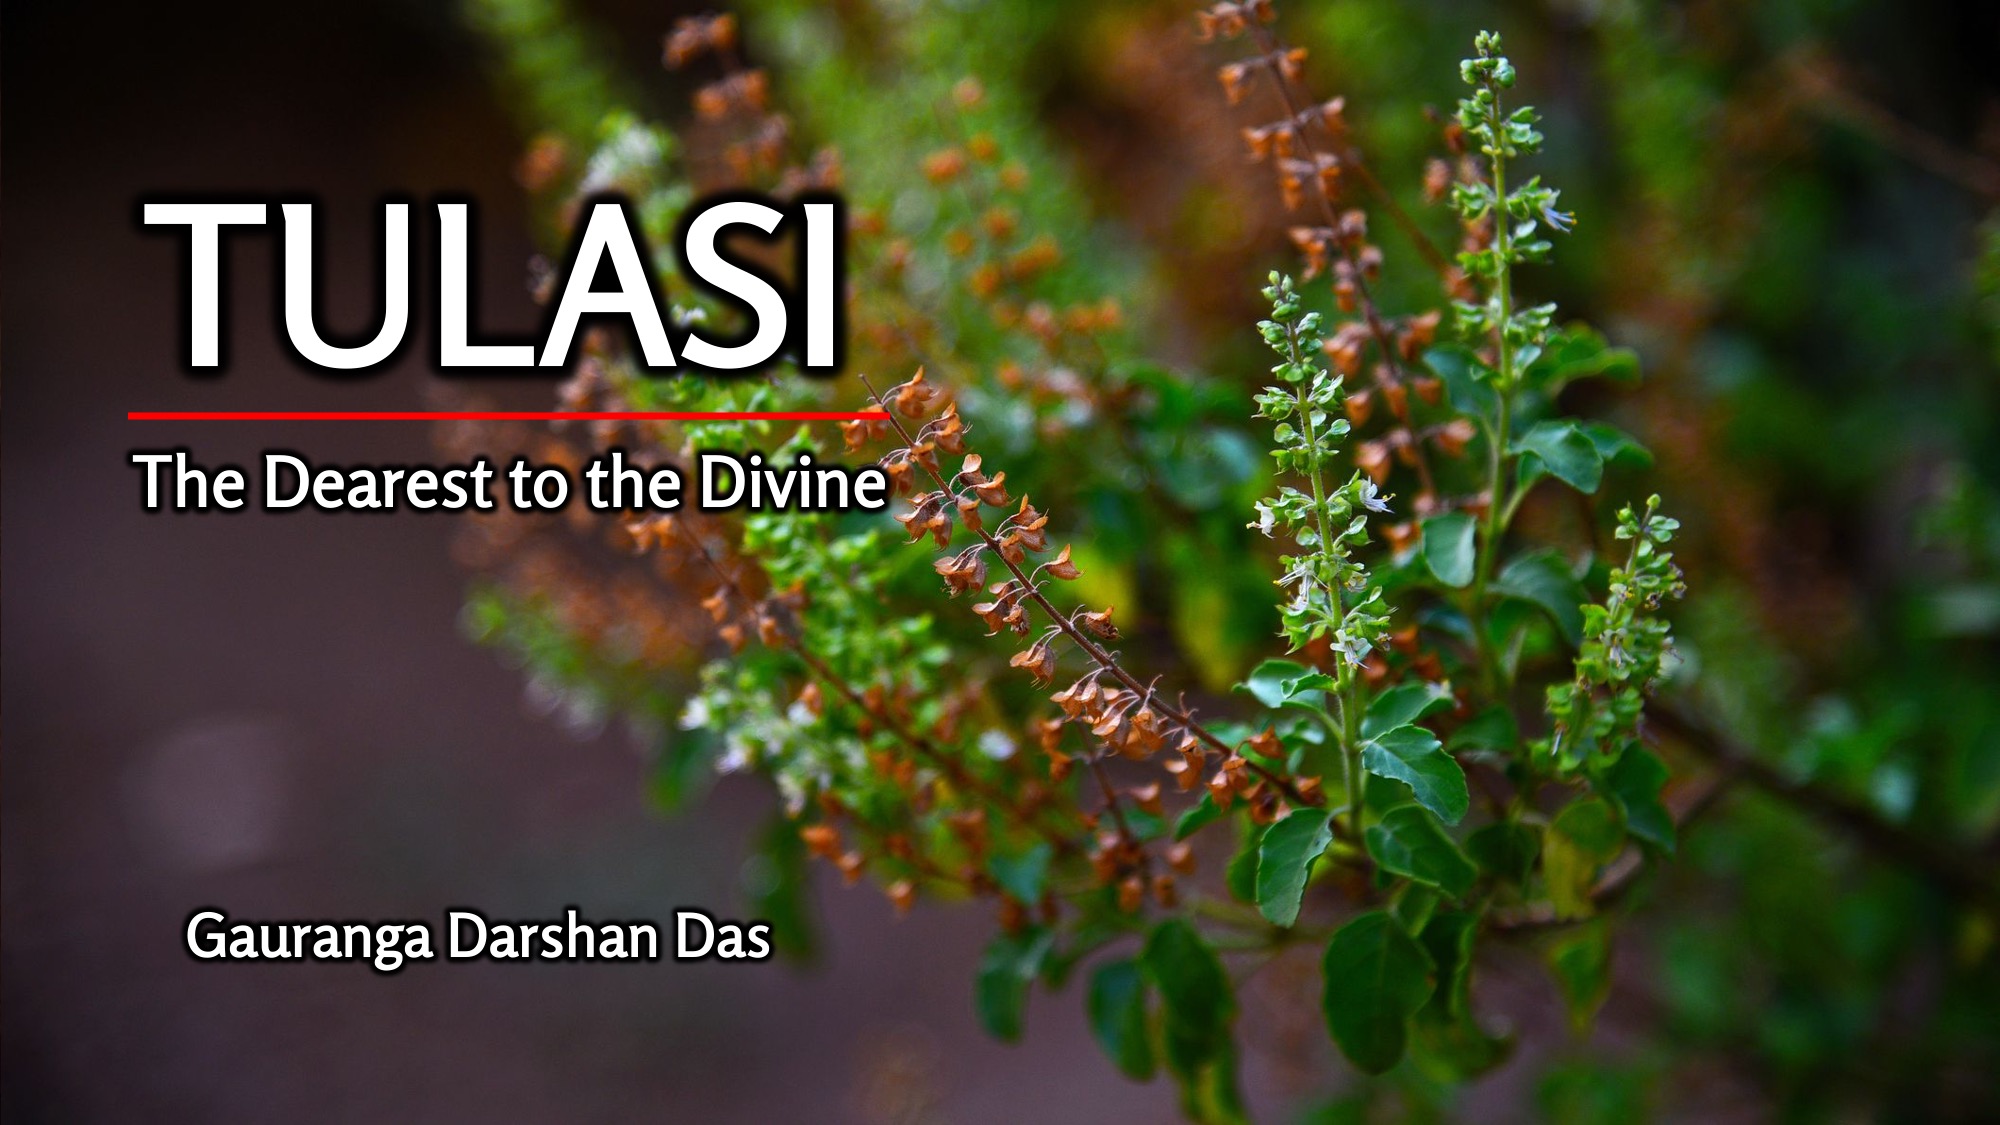 TULASI: The Dearest to the Divine